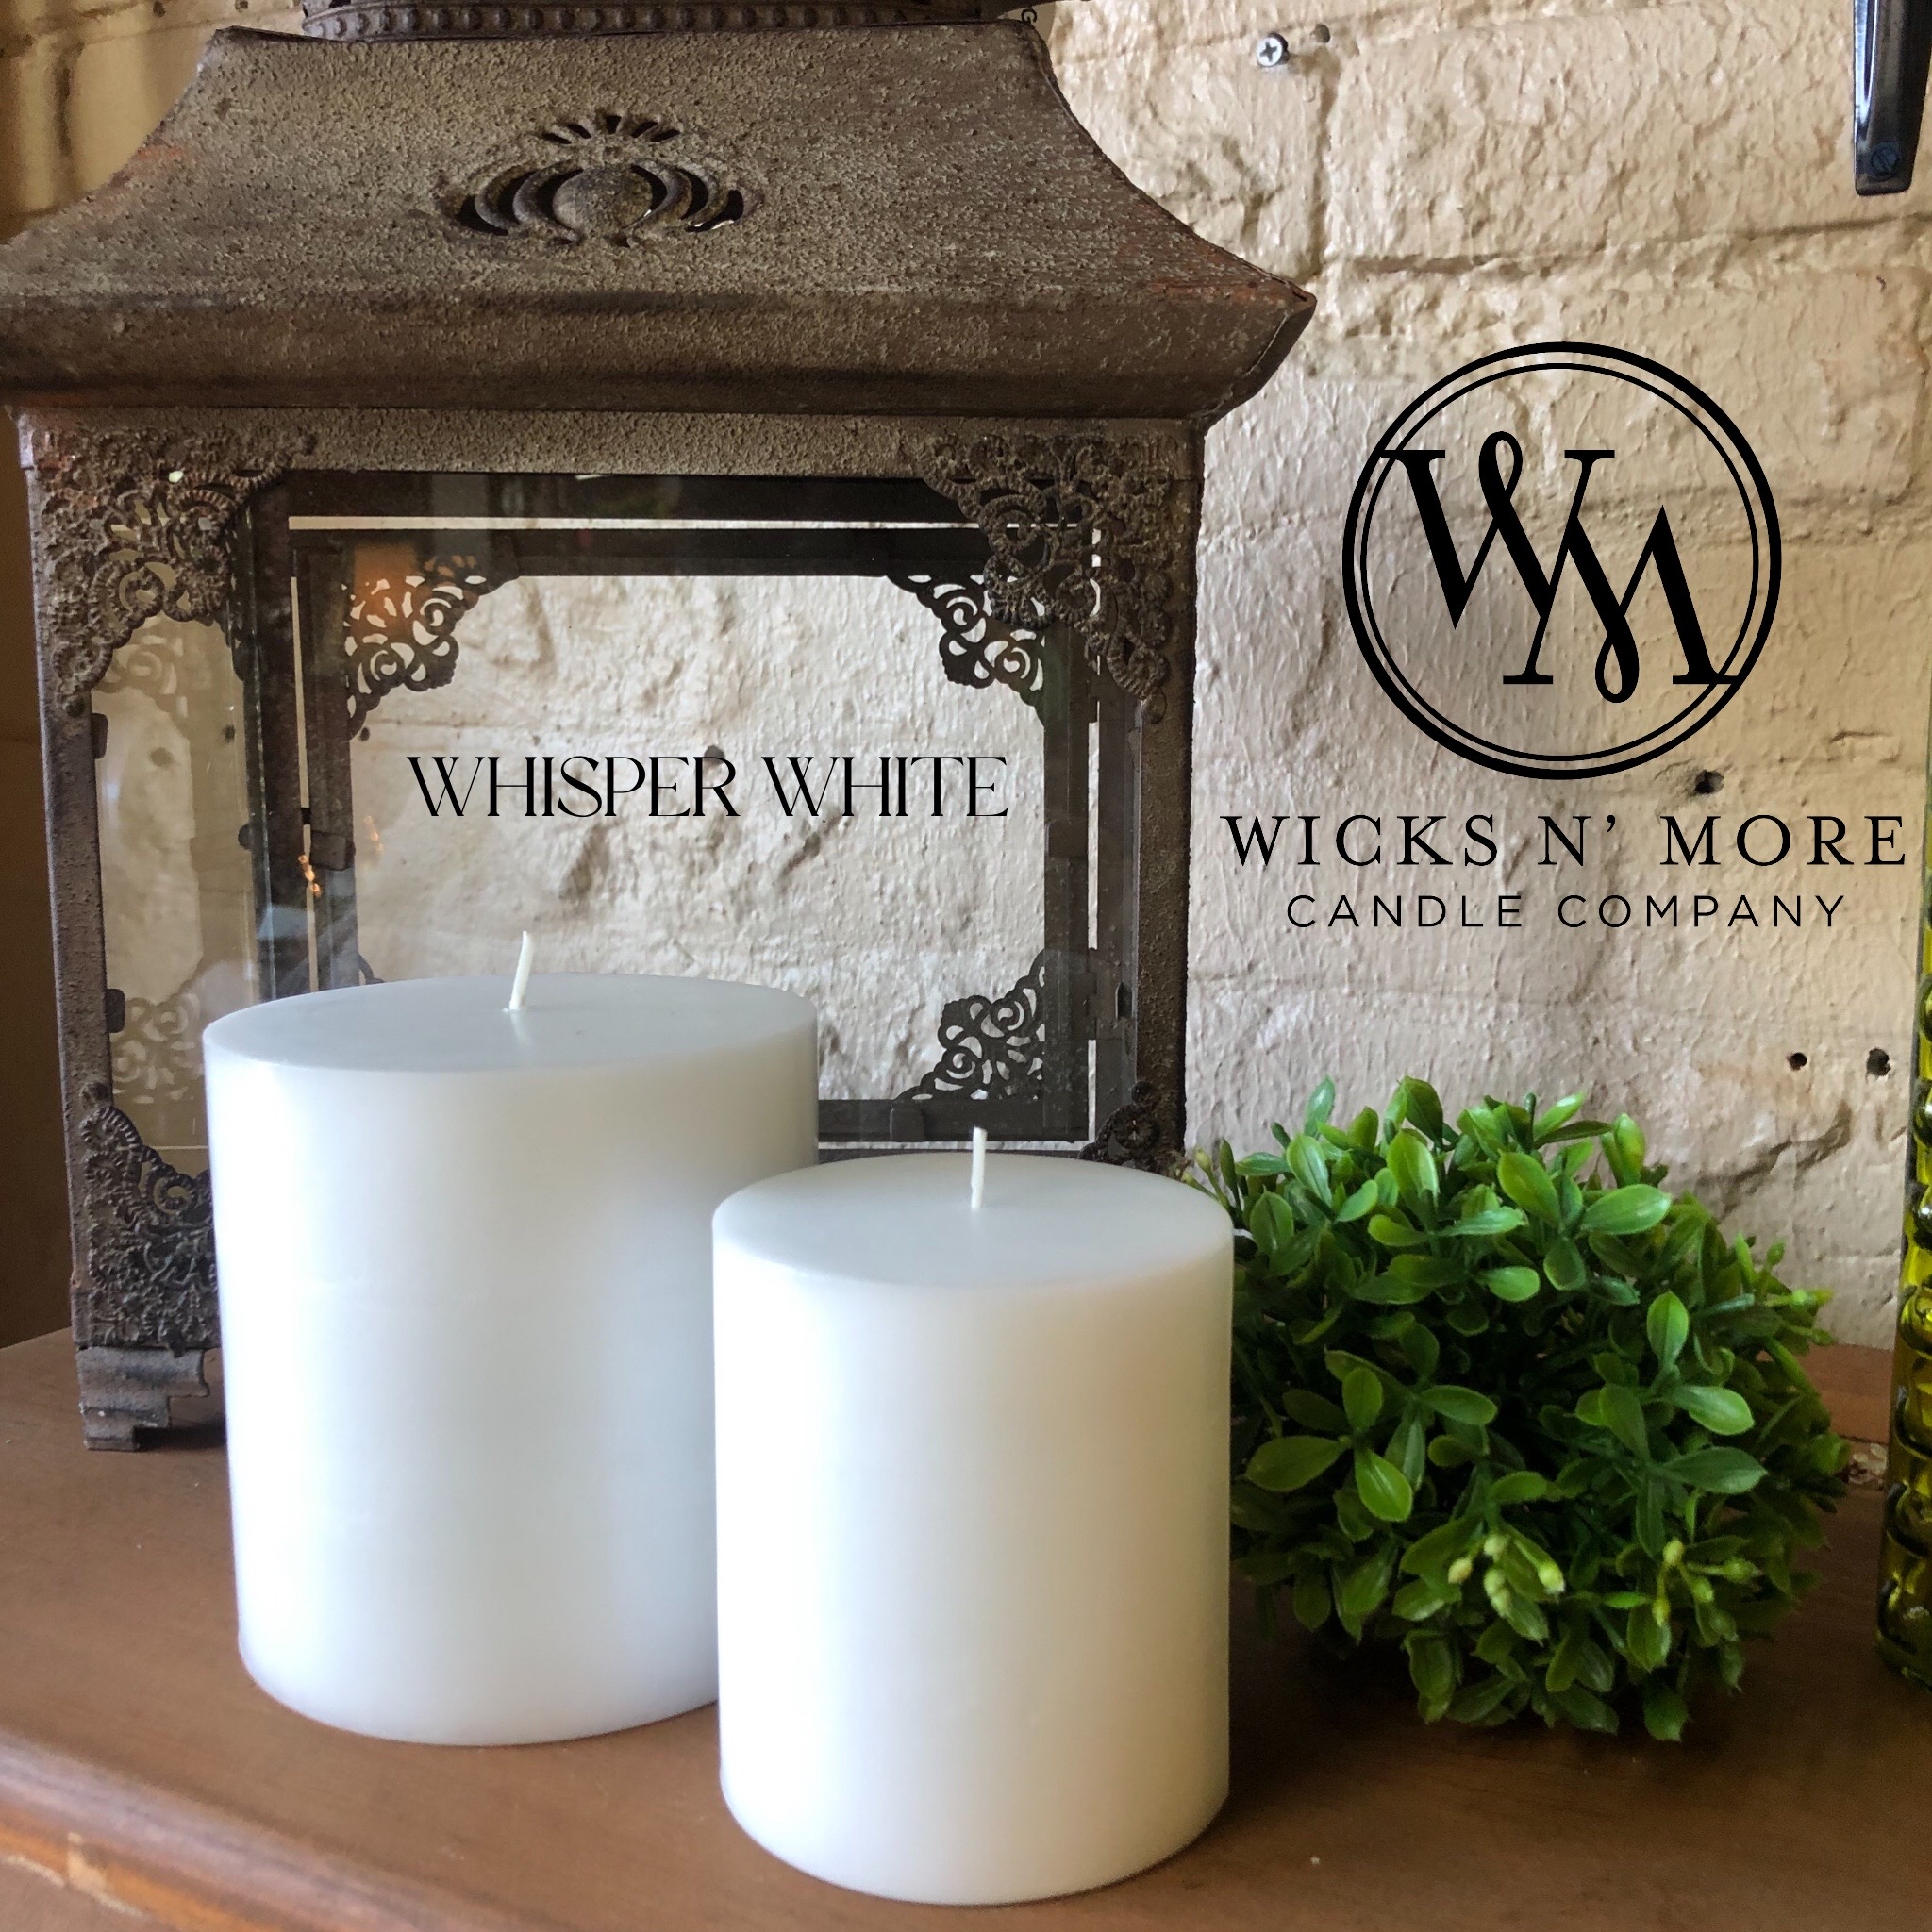 White Peppermint Scented Candle - Wicks N' More Candle Company